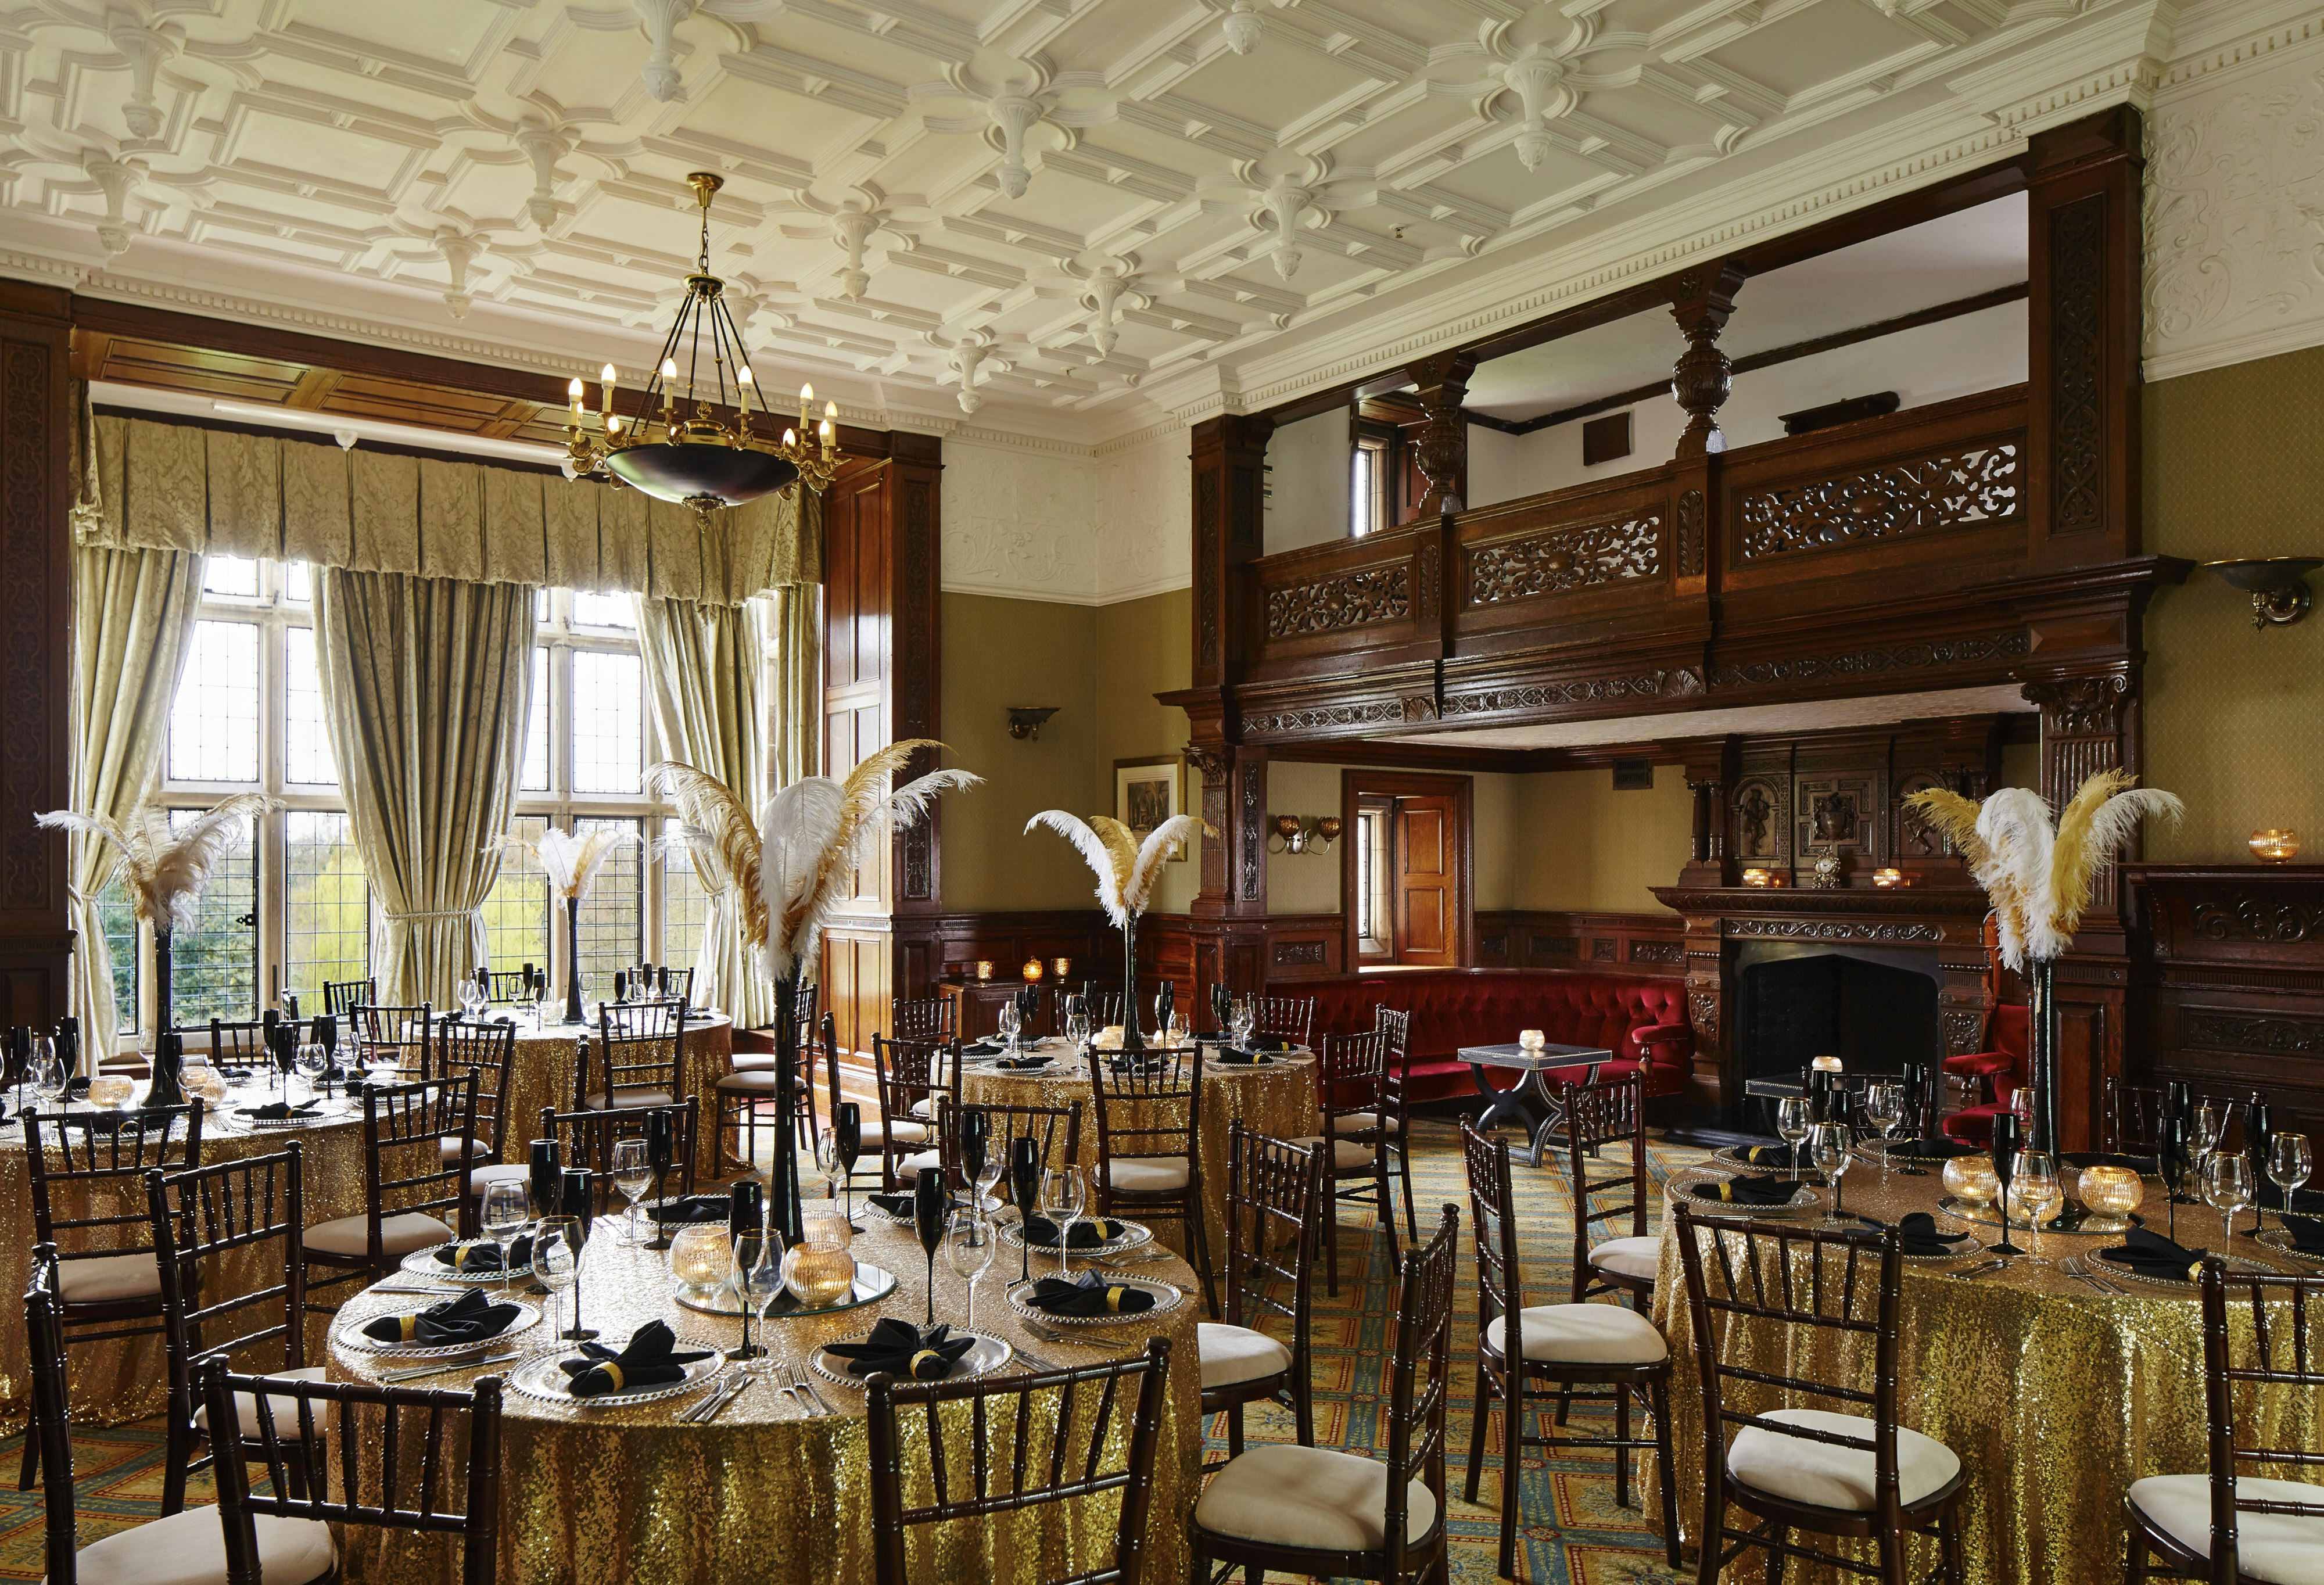 Delta Hotels by Marriott Breadsall Priory Country Club - Haslam Room image 1